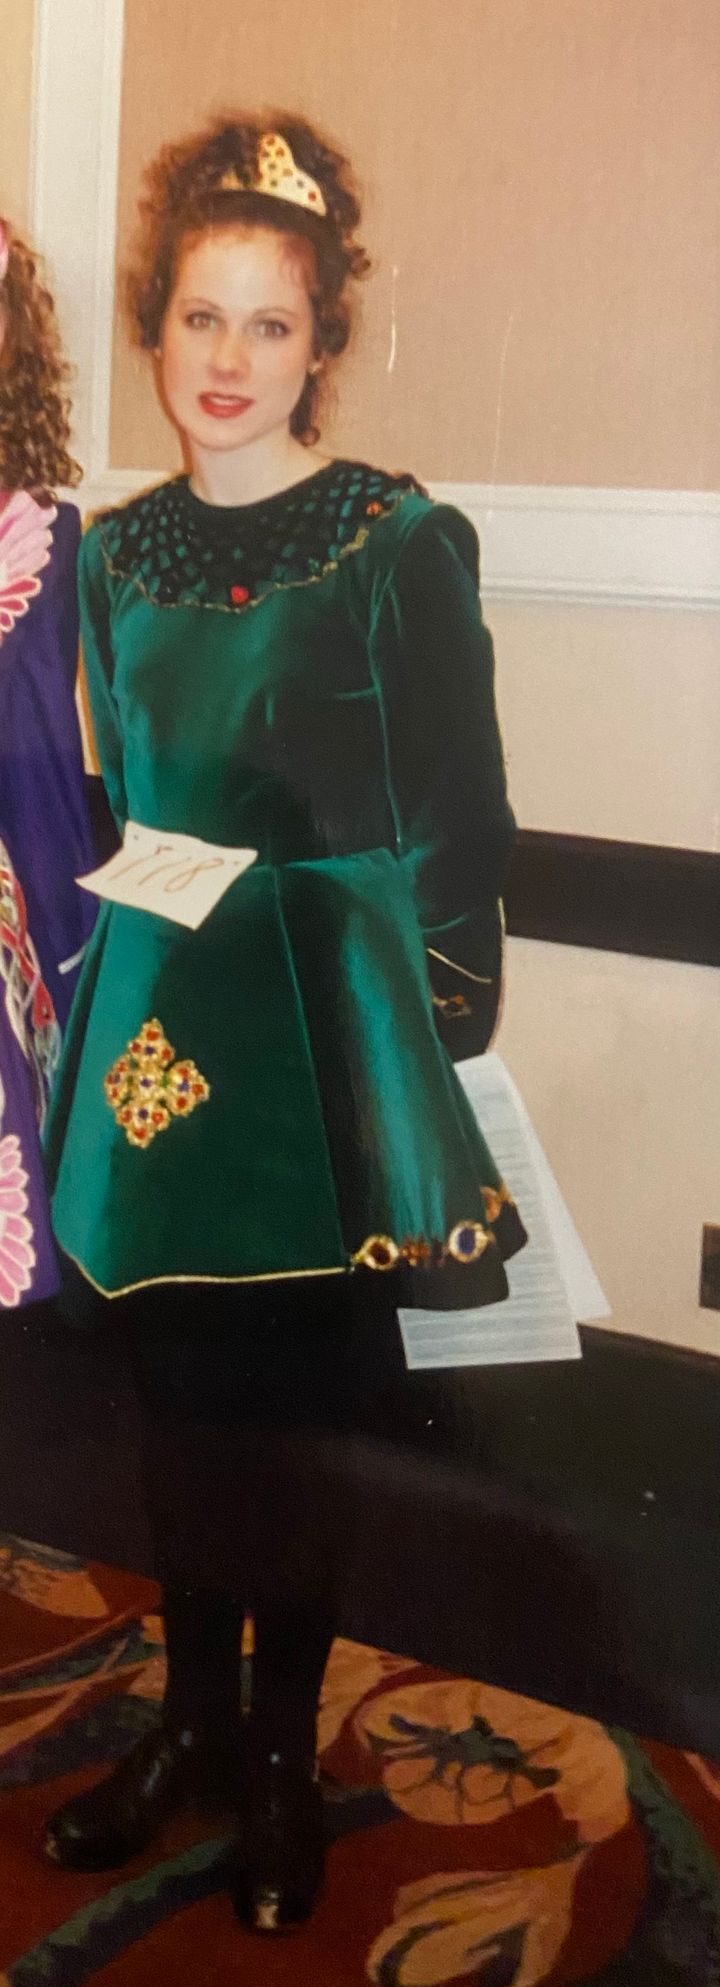 The author at an Irish dance competition in 1997.